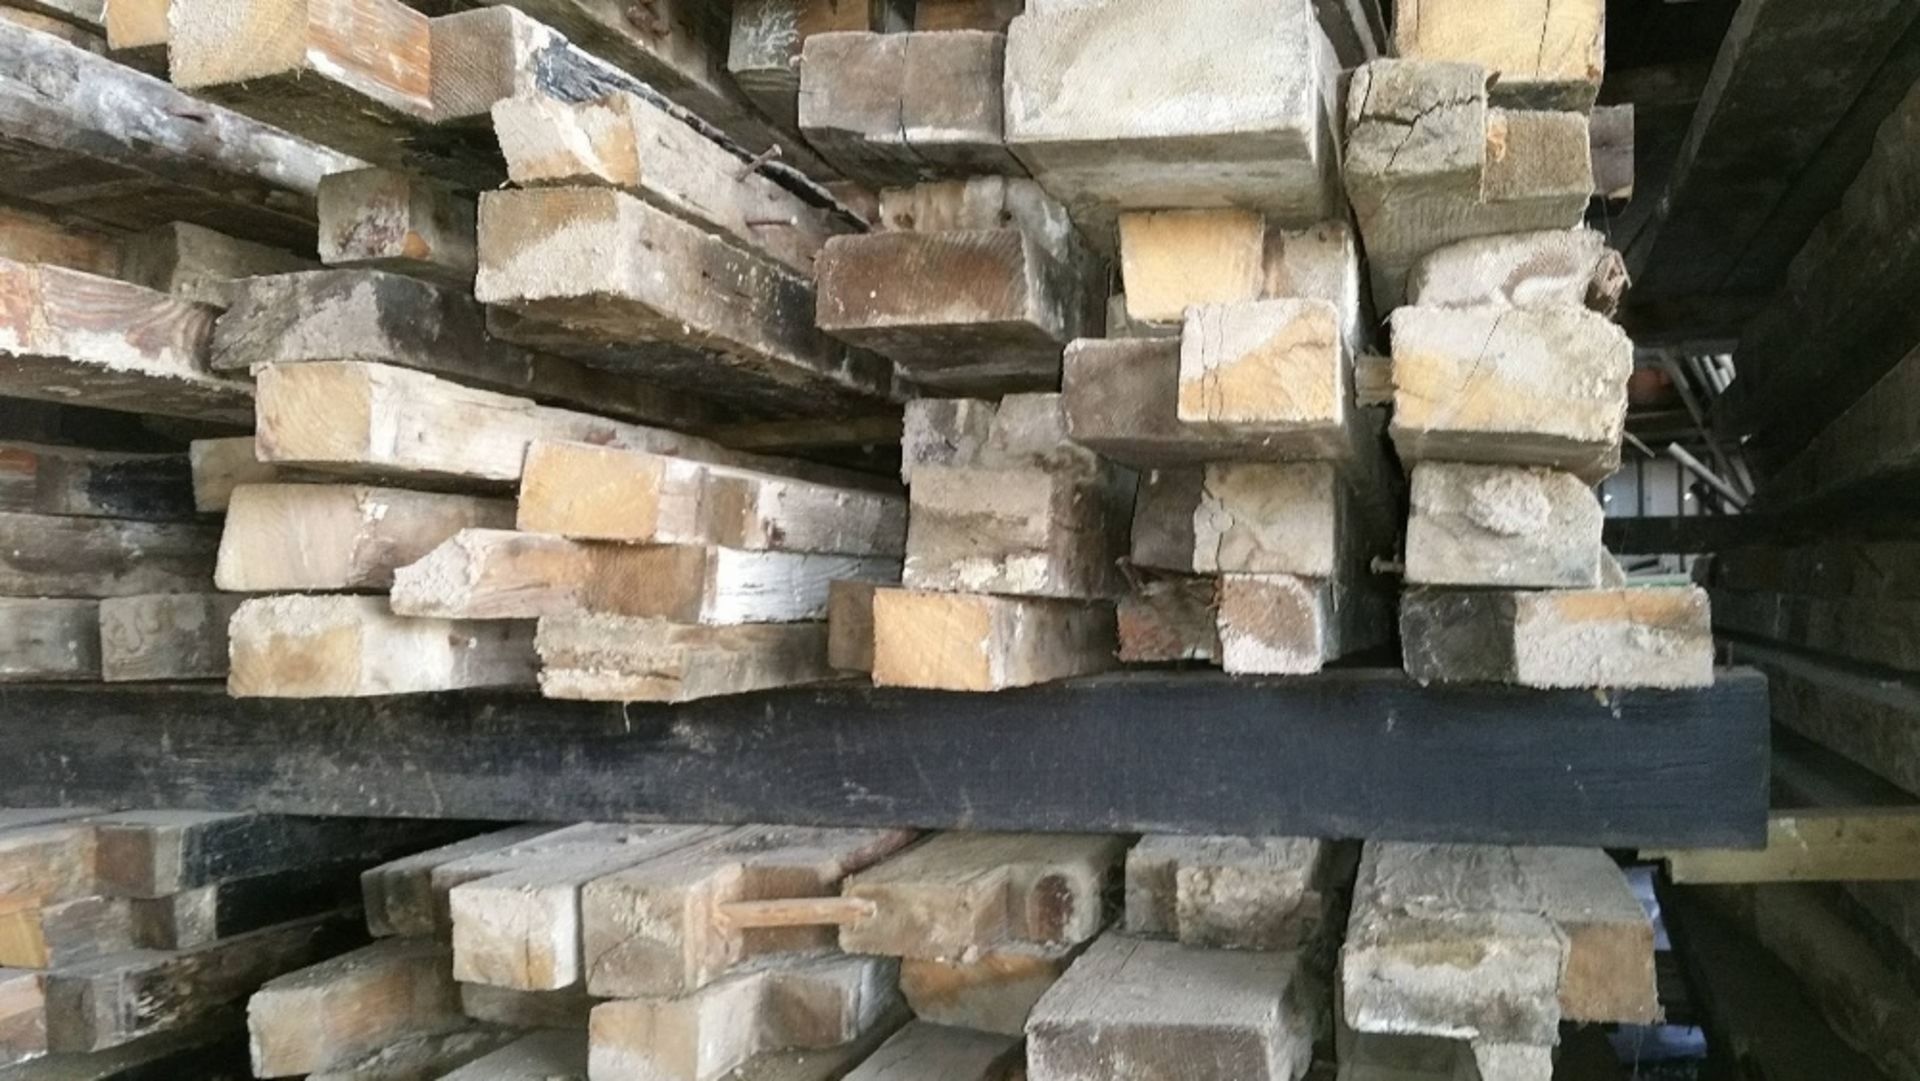 200 year old approx joist timbers taken from a warehouse in clink street, london. - Image 4 of 4